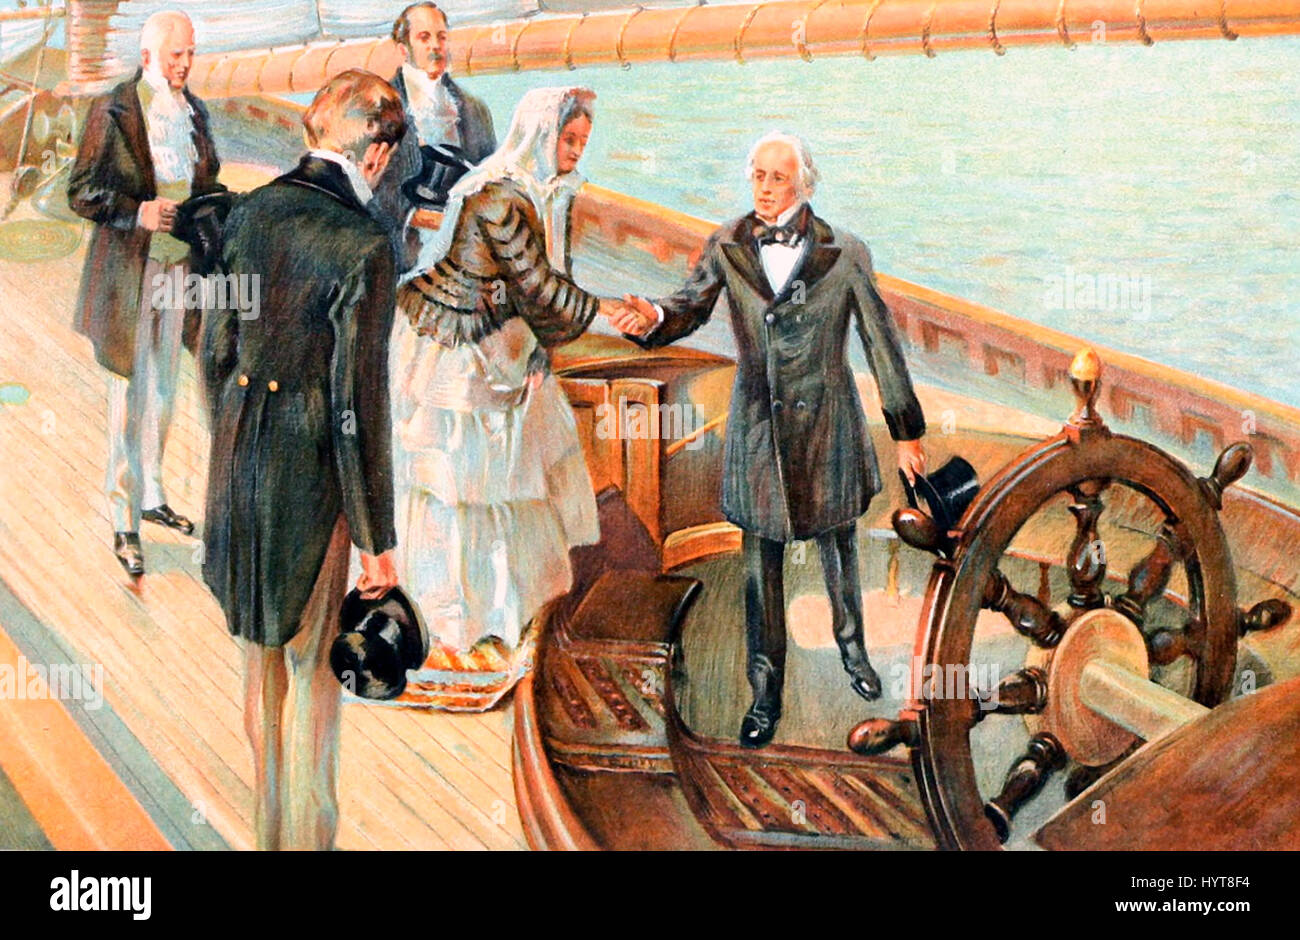 Queen Victoria on Board the America - Her Majesty Queen Victoria congratulates John Cox Stevens, Commodore of the New York Yacht Club, aboard the yacht America, winner of the £100 Cup. Colonel James A Hamilton, Lord Alfred Paget, Commodore John C Stevens, 1851. Original America's Cup Stock Photo